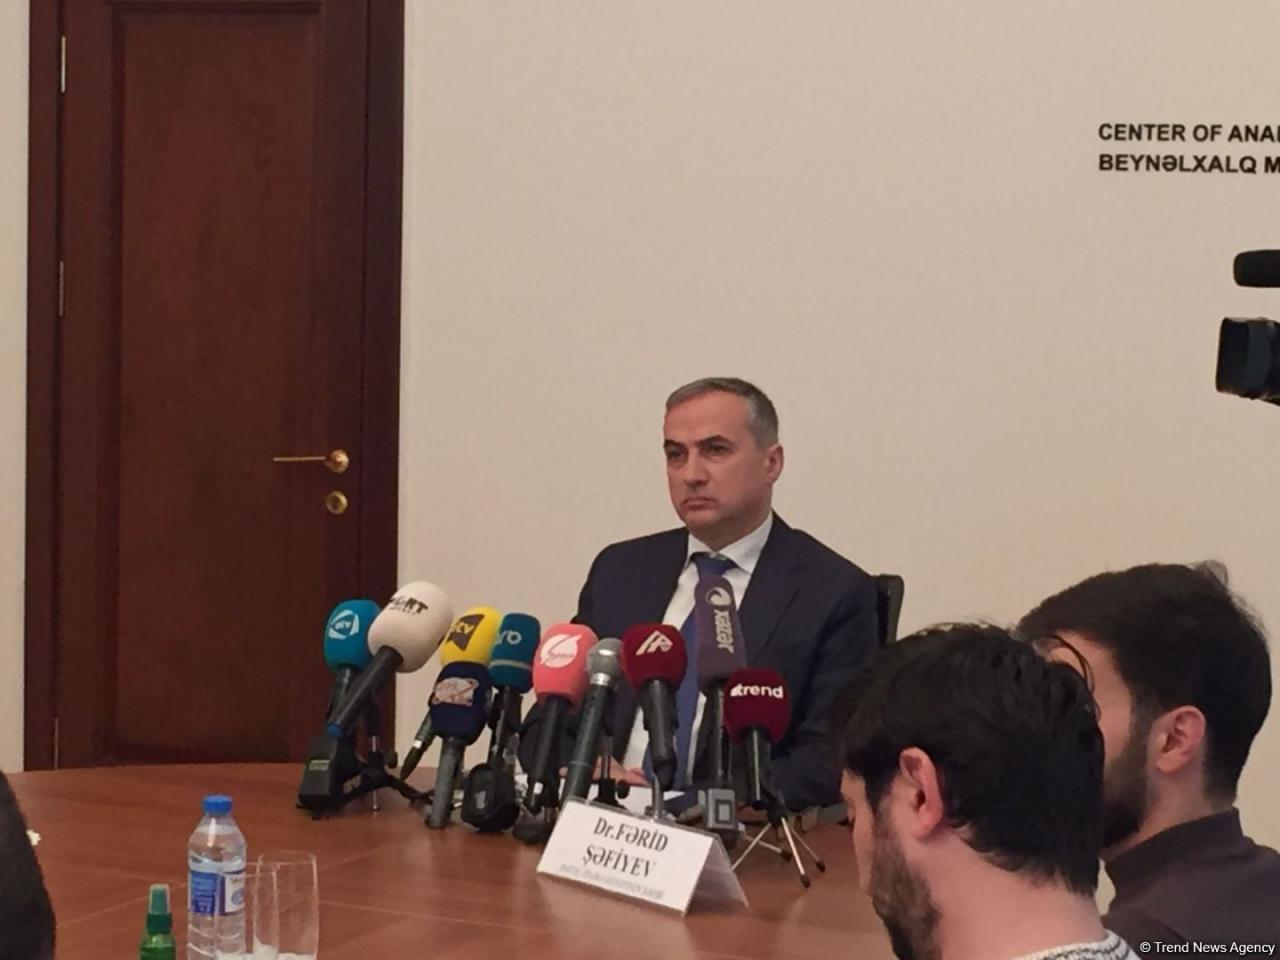 Expert: Armenia knows importance of normalizing ties with Azerbaijan